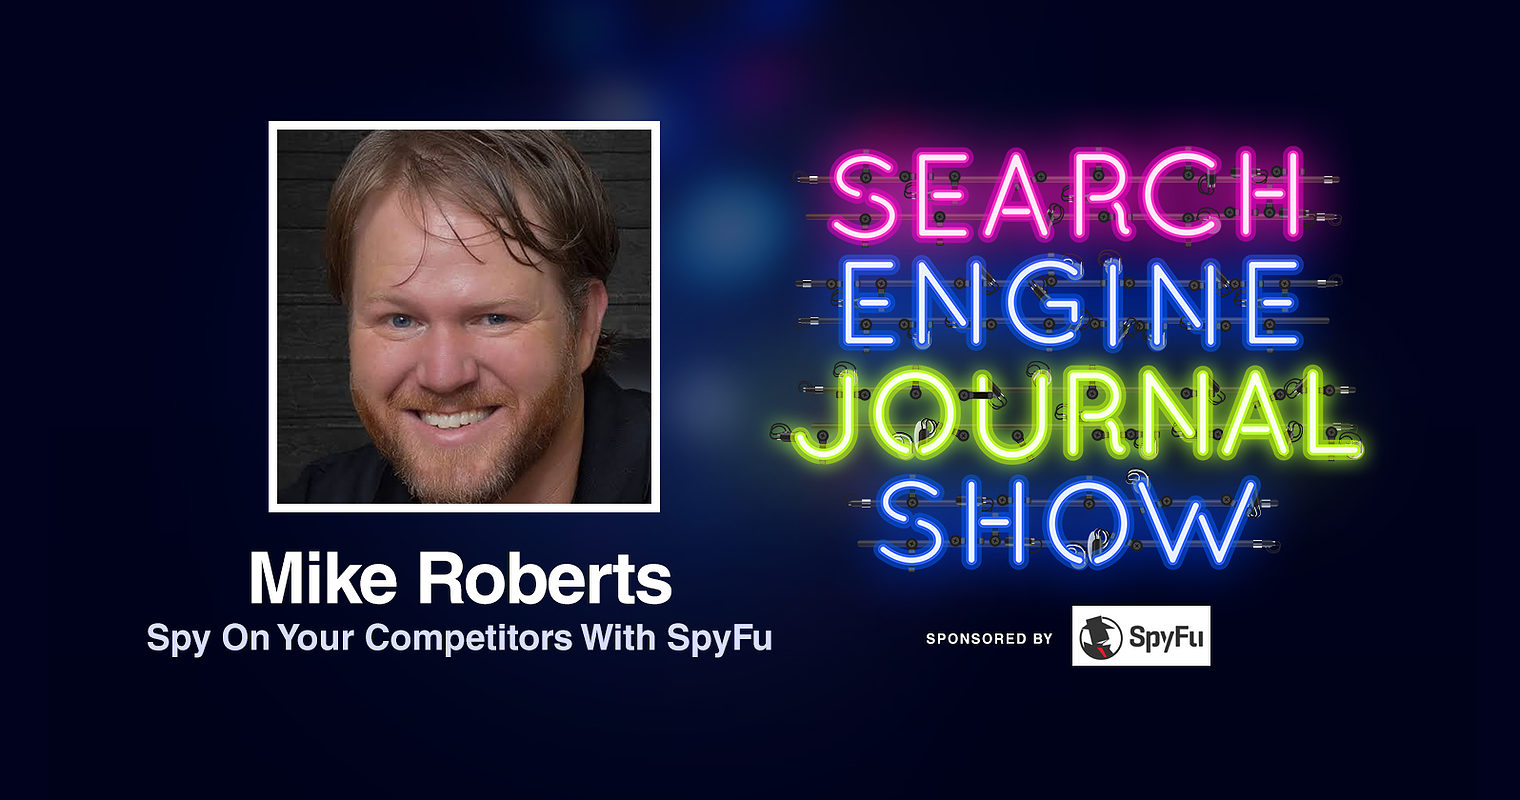 SpyFu CEO Mike Roberts on How to Spy on Your Competitors